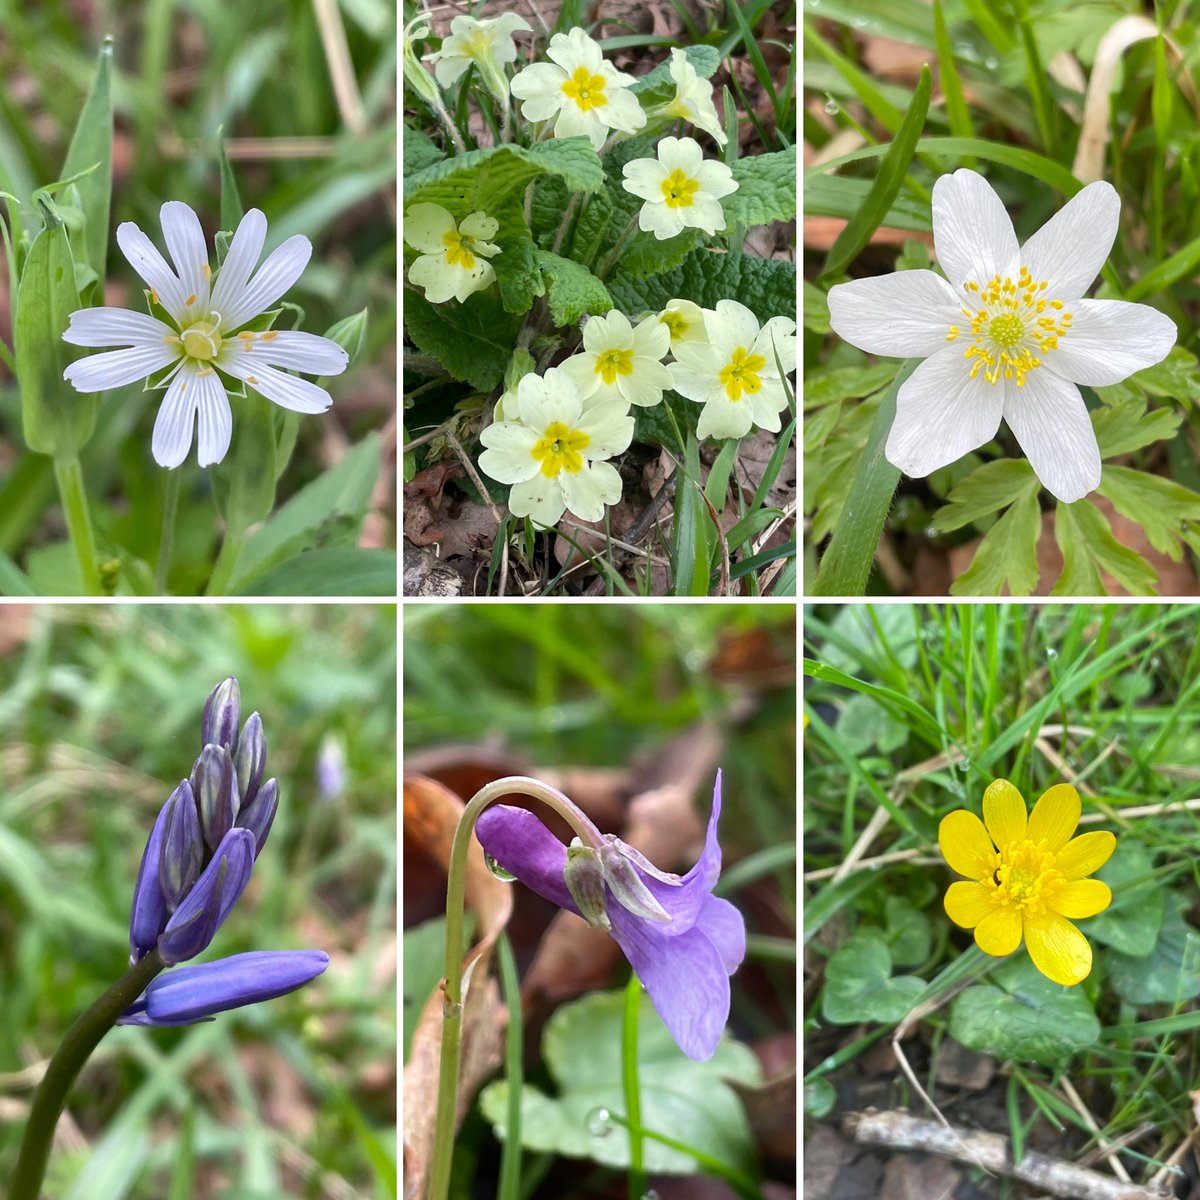 Spring time stroll around the woodland today, starting to look nice and green and come to life.

Greater stitchwort, Primrose, Wood anemone, Bluebells, Early Dog violet and Lesser celandine now all in bloom

#wildflowerhour
#signsofspring #ancientwoodlands